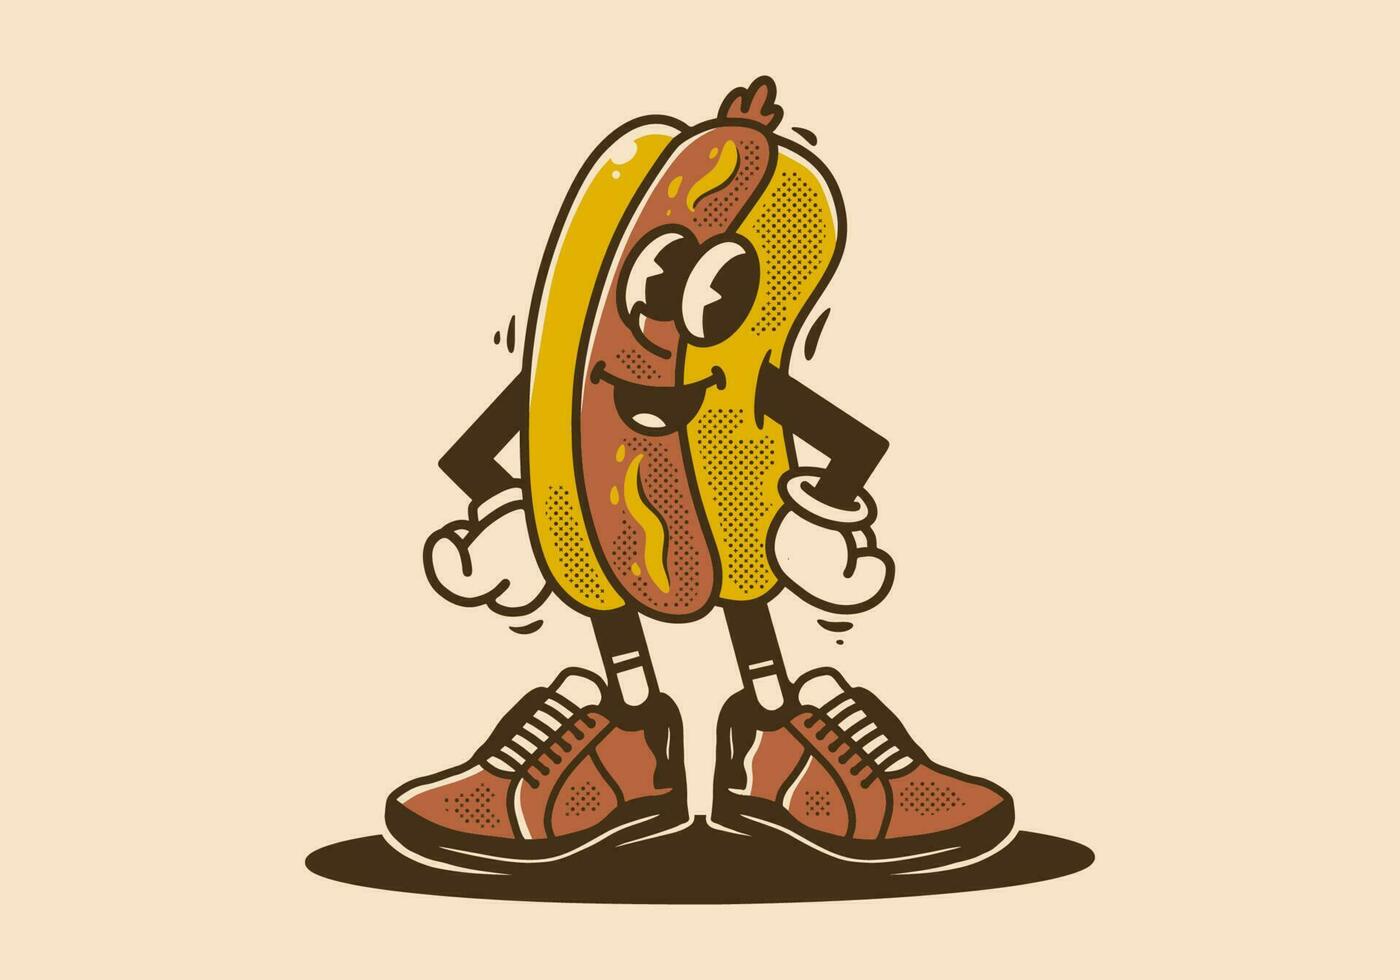 Mascot character of a hotdog in an upright standing position vector